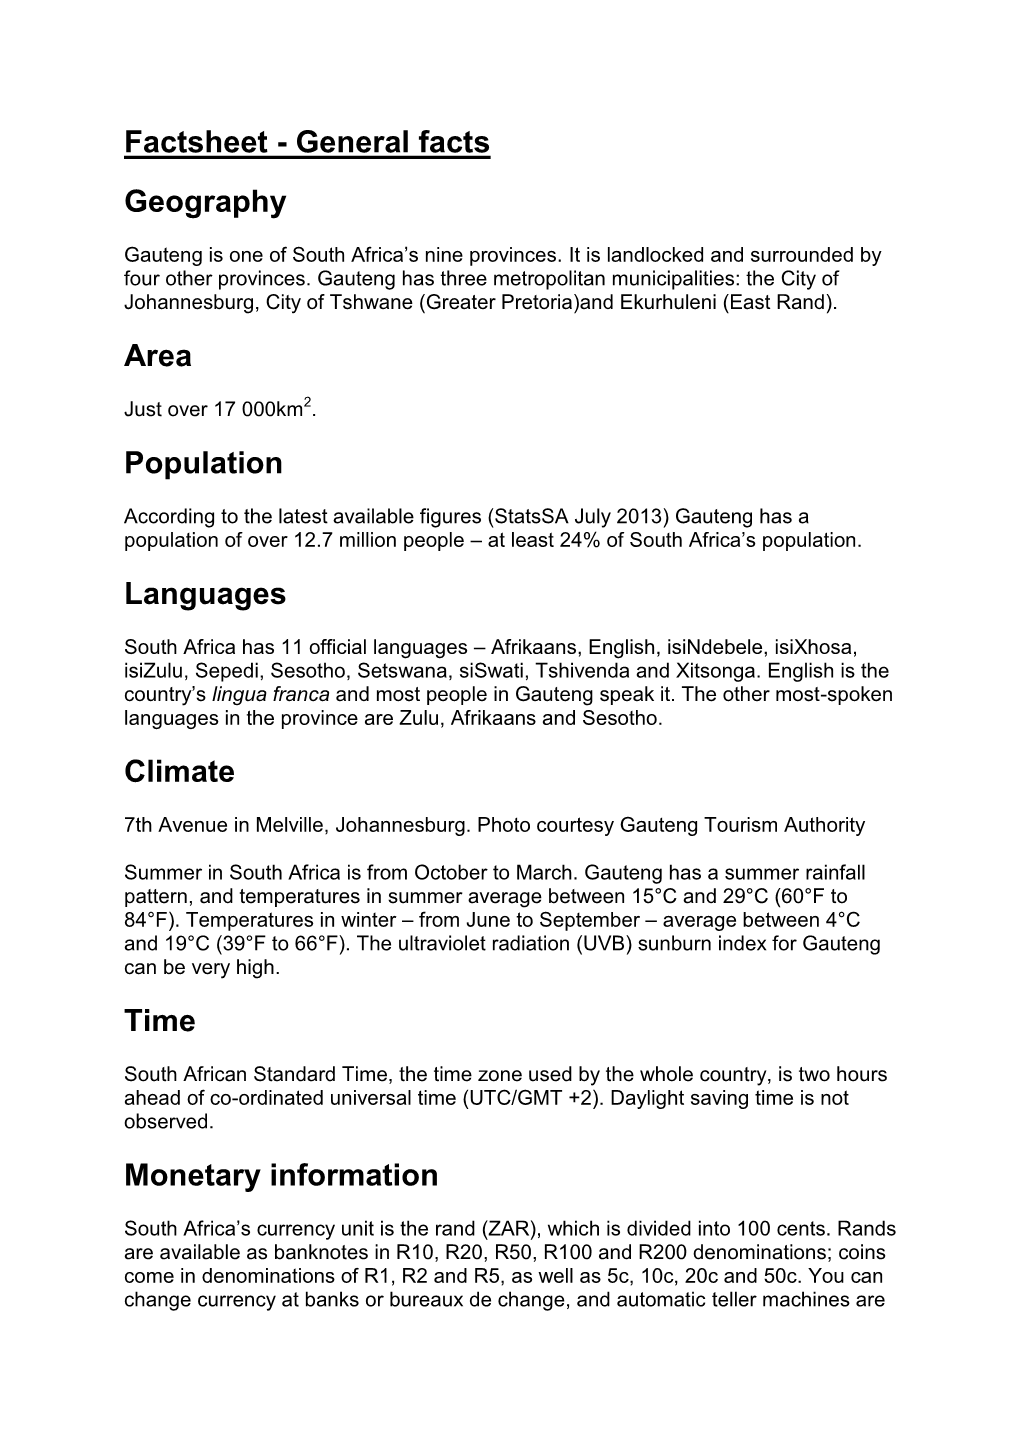 Factsheet - General Facts Geography